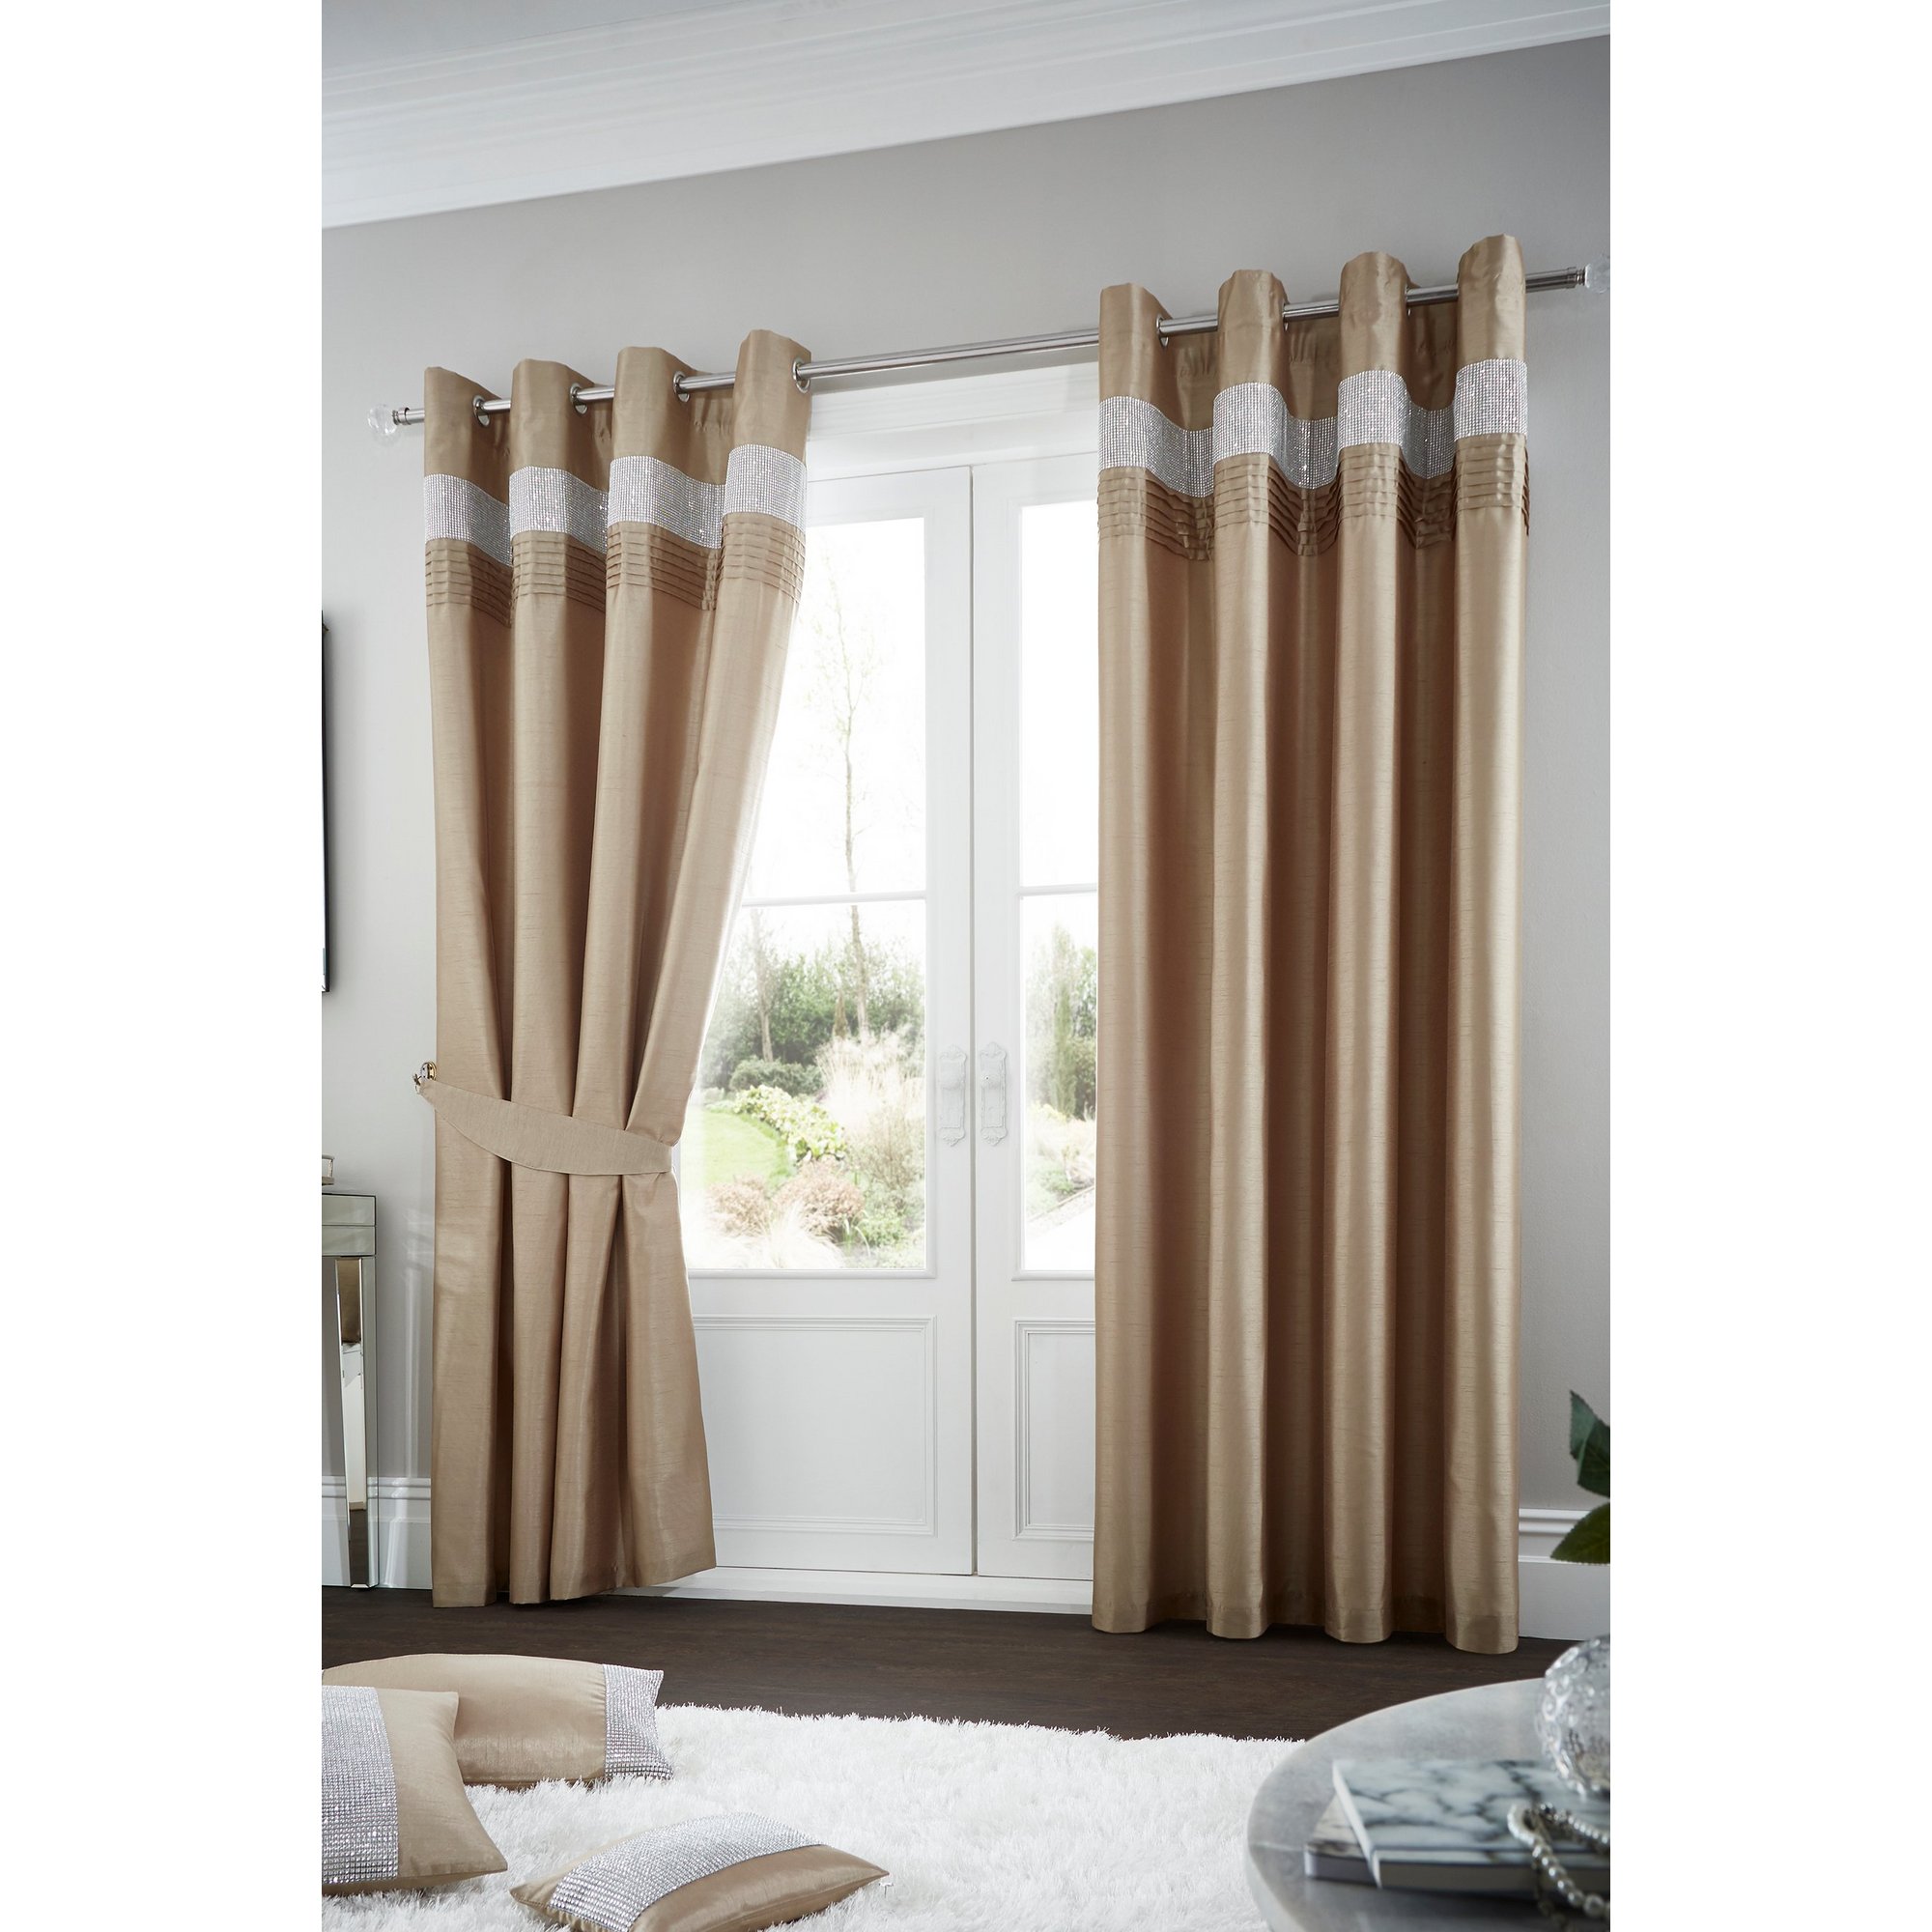 Image of Oxy Lined Eyelet Curtains